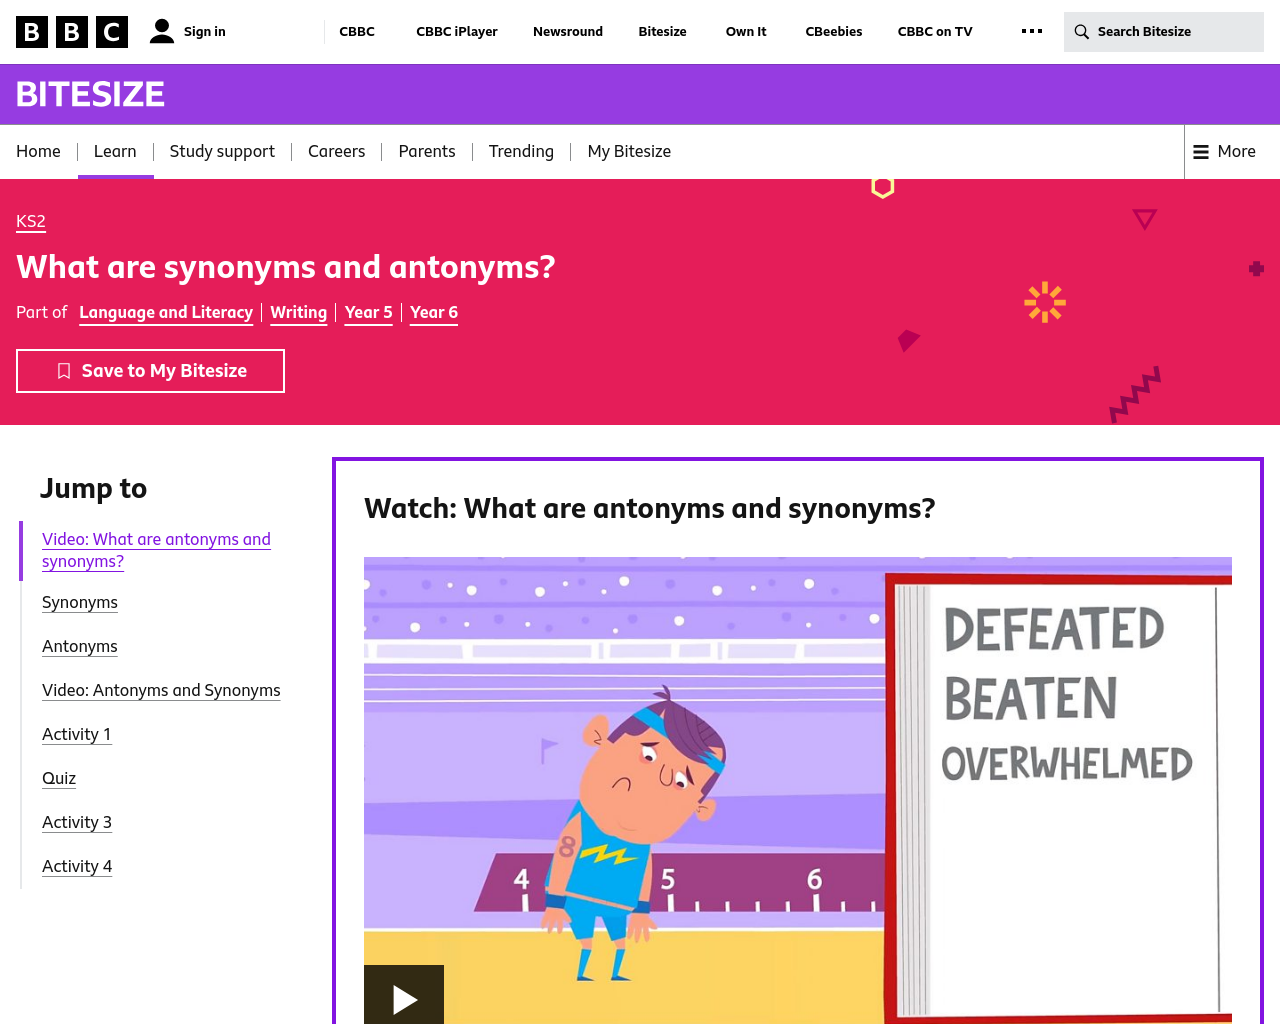 What are synonyms and what are antonyms?